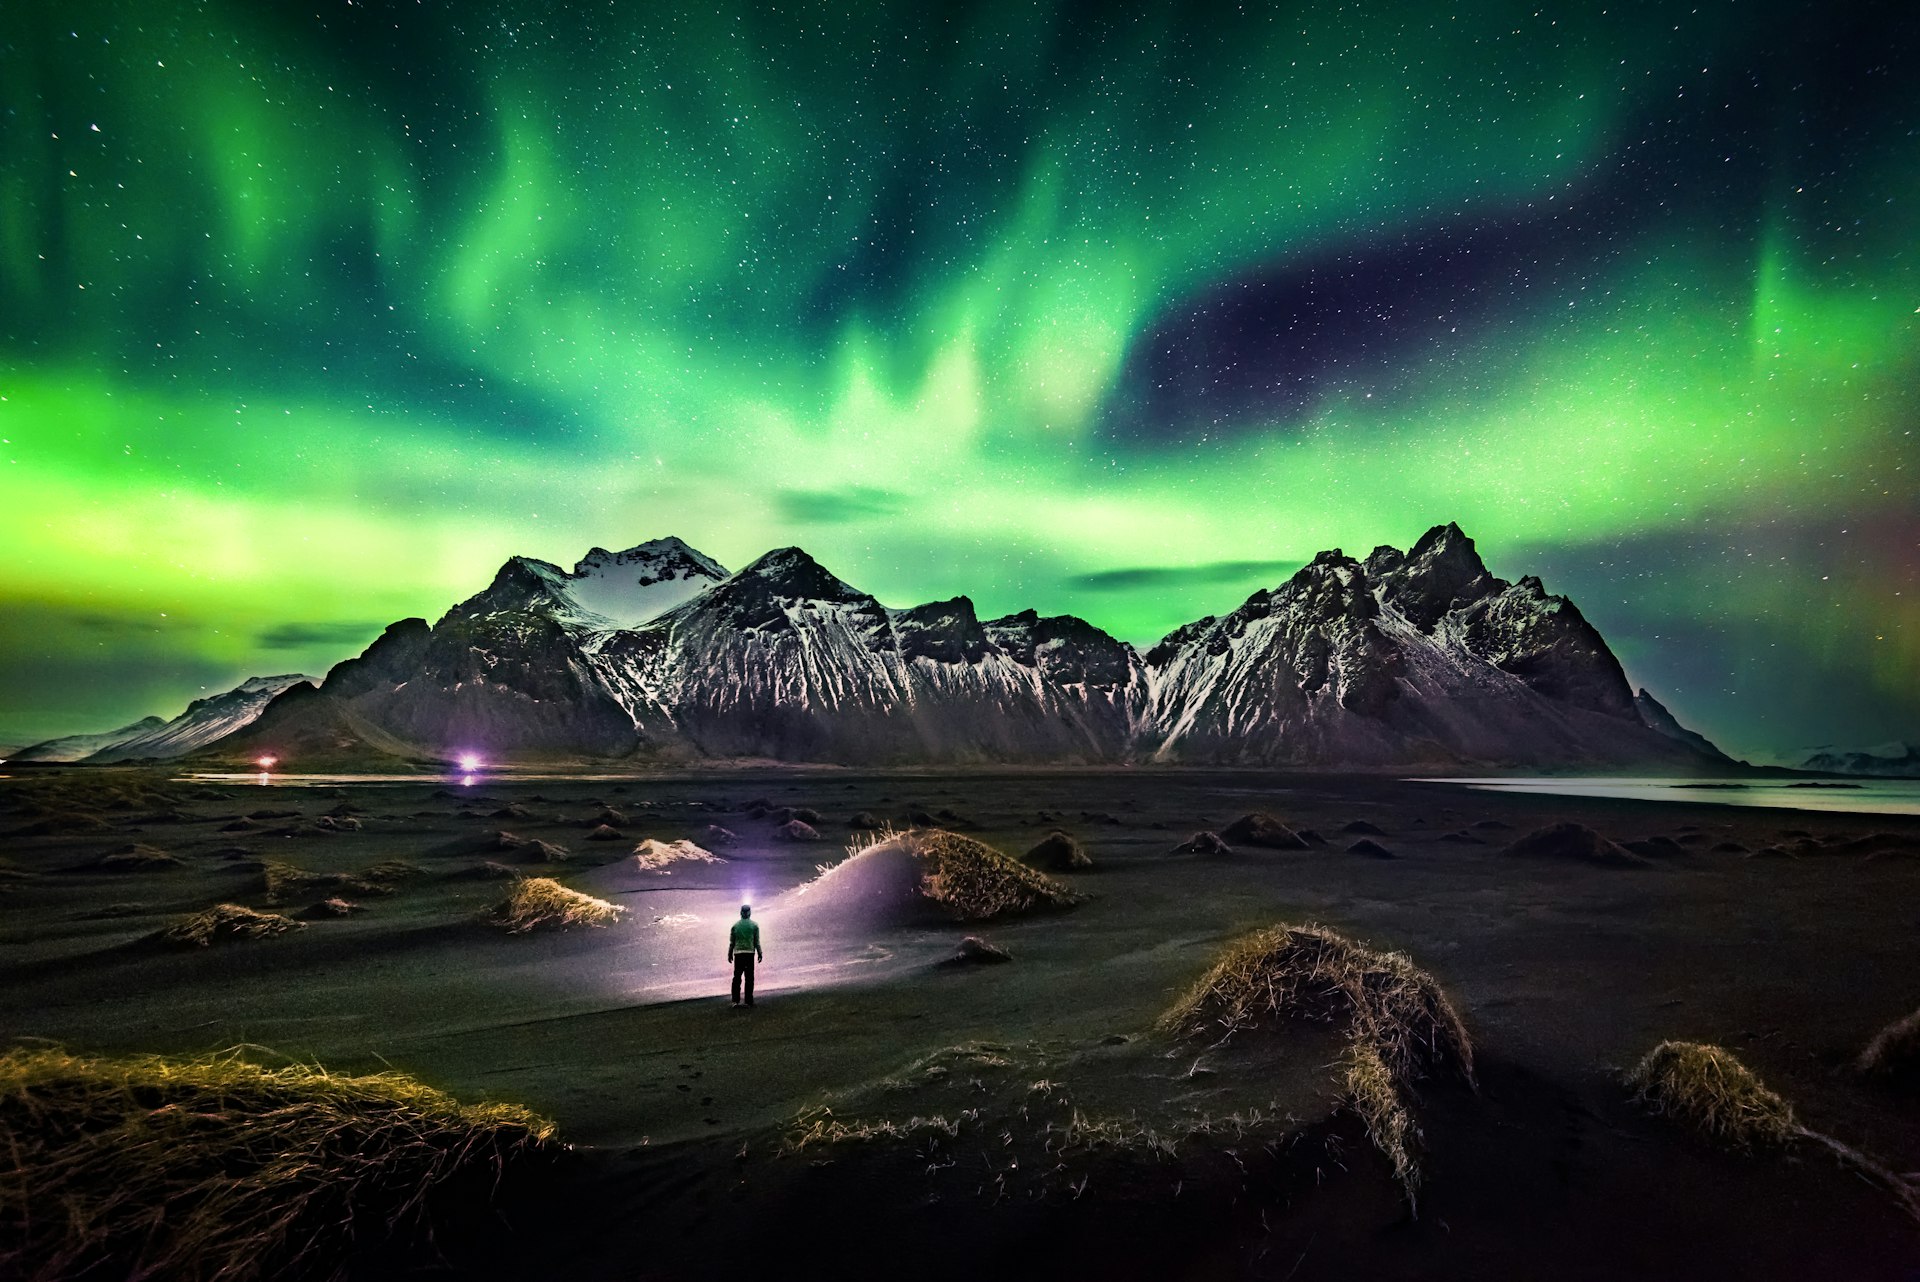 A lone figure stands on a black sandy beach at night, illuminated by a headlamp, with the majestic Northern Lights casting a green glow over the rugged mountain peaks in the background.